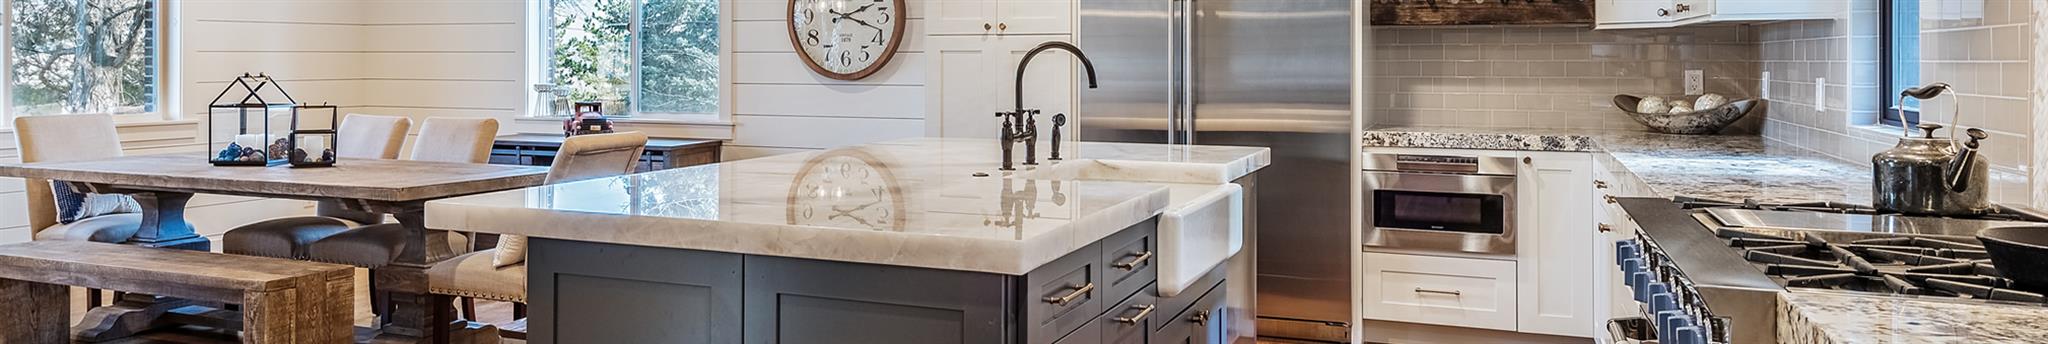 How to Clean and Disinfect Granite Countertops Guide